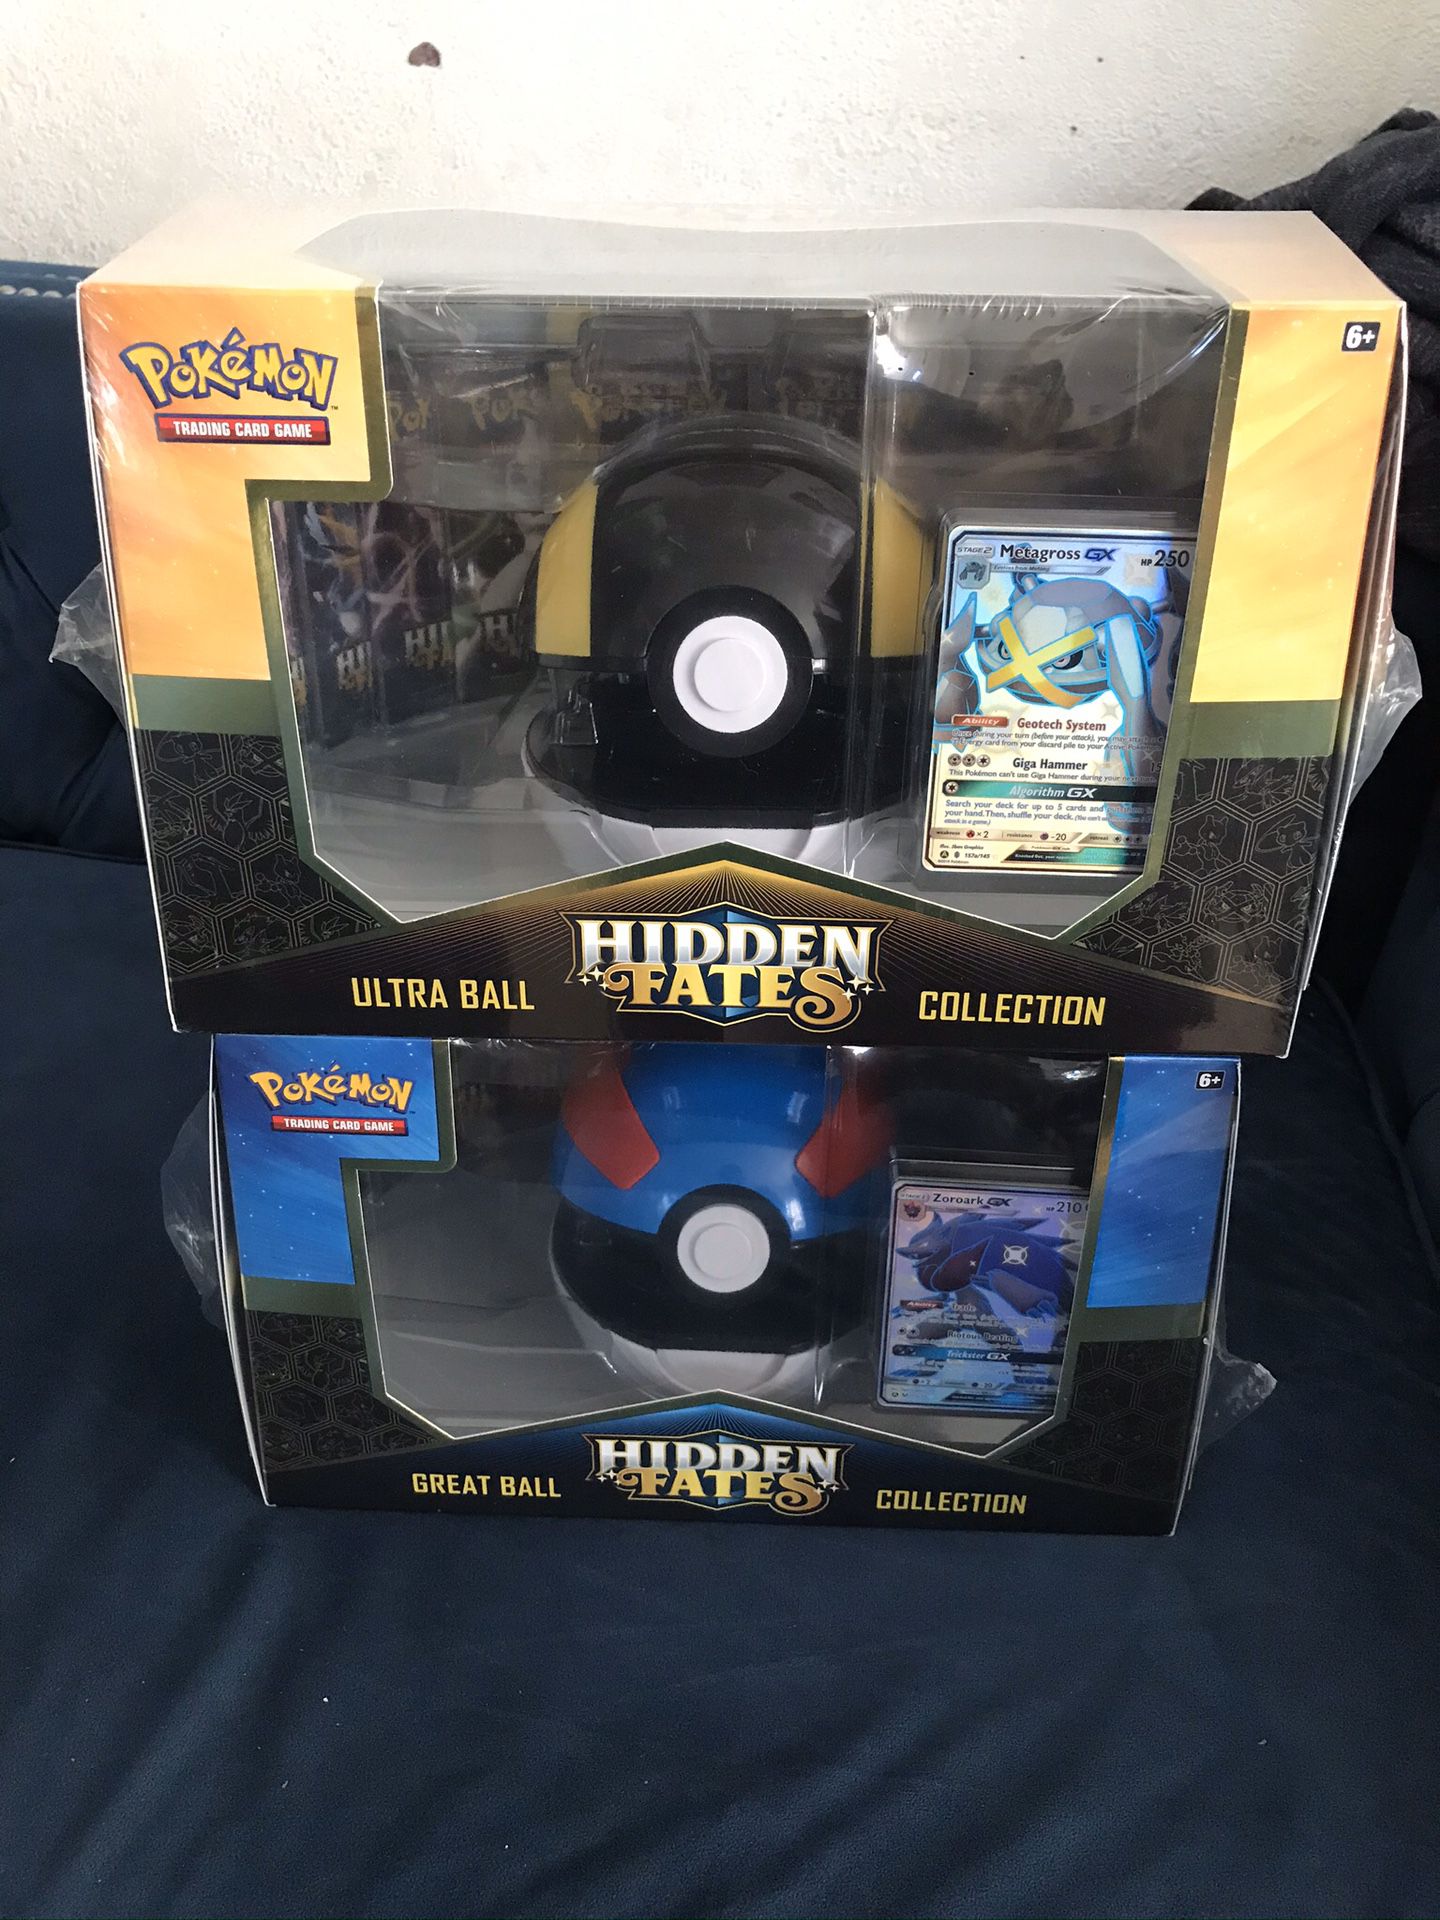 Pokémon hidden fates great and ultra ball collection set.